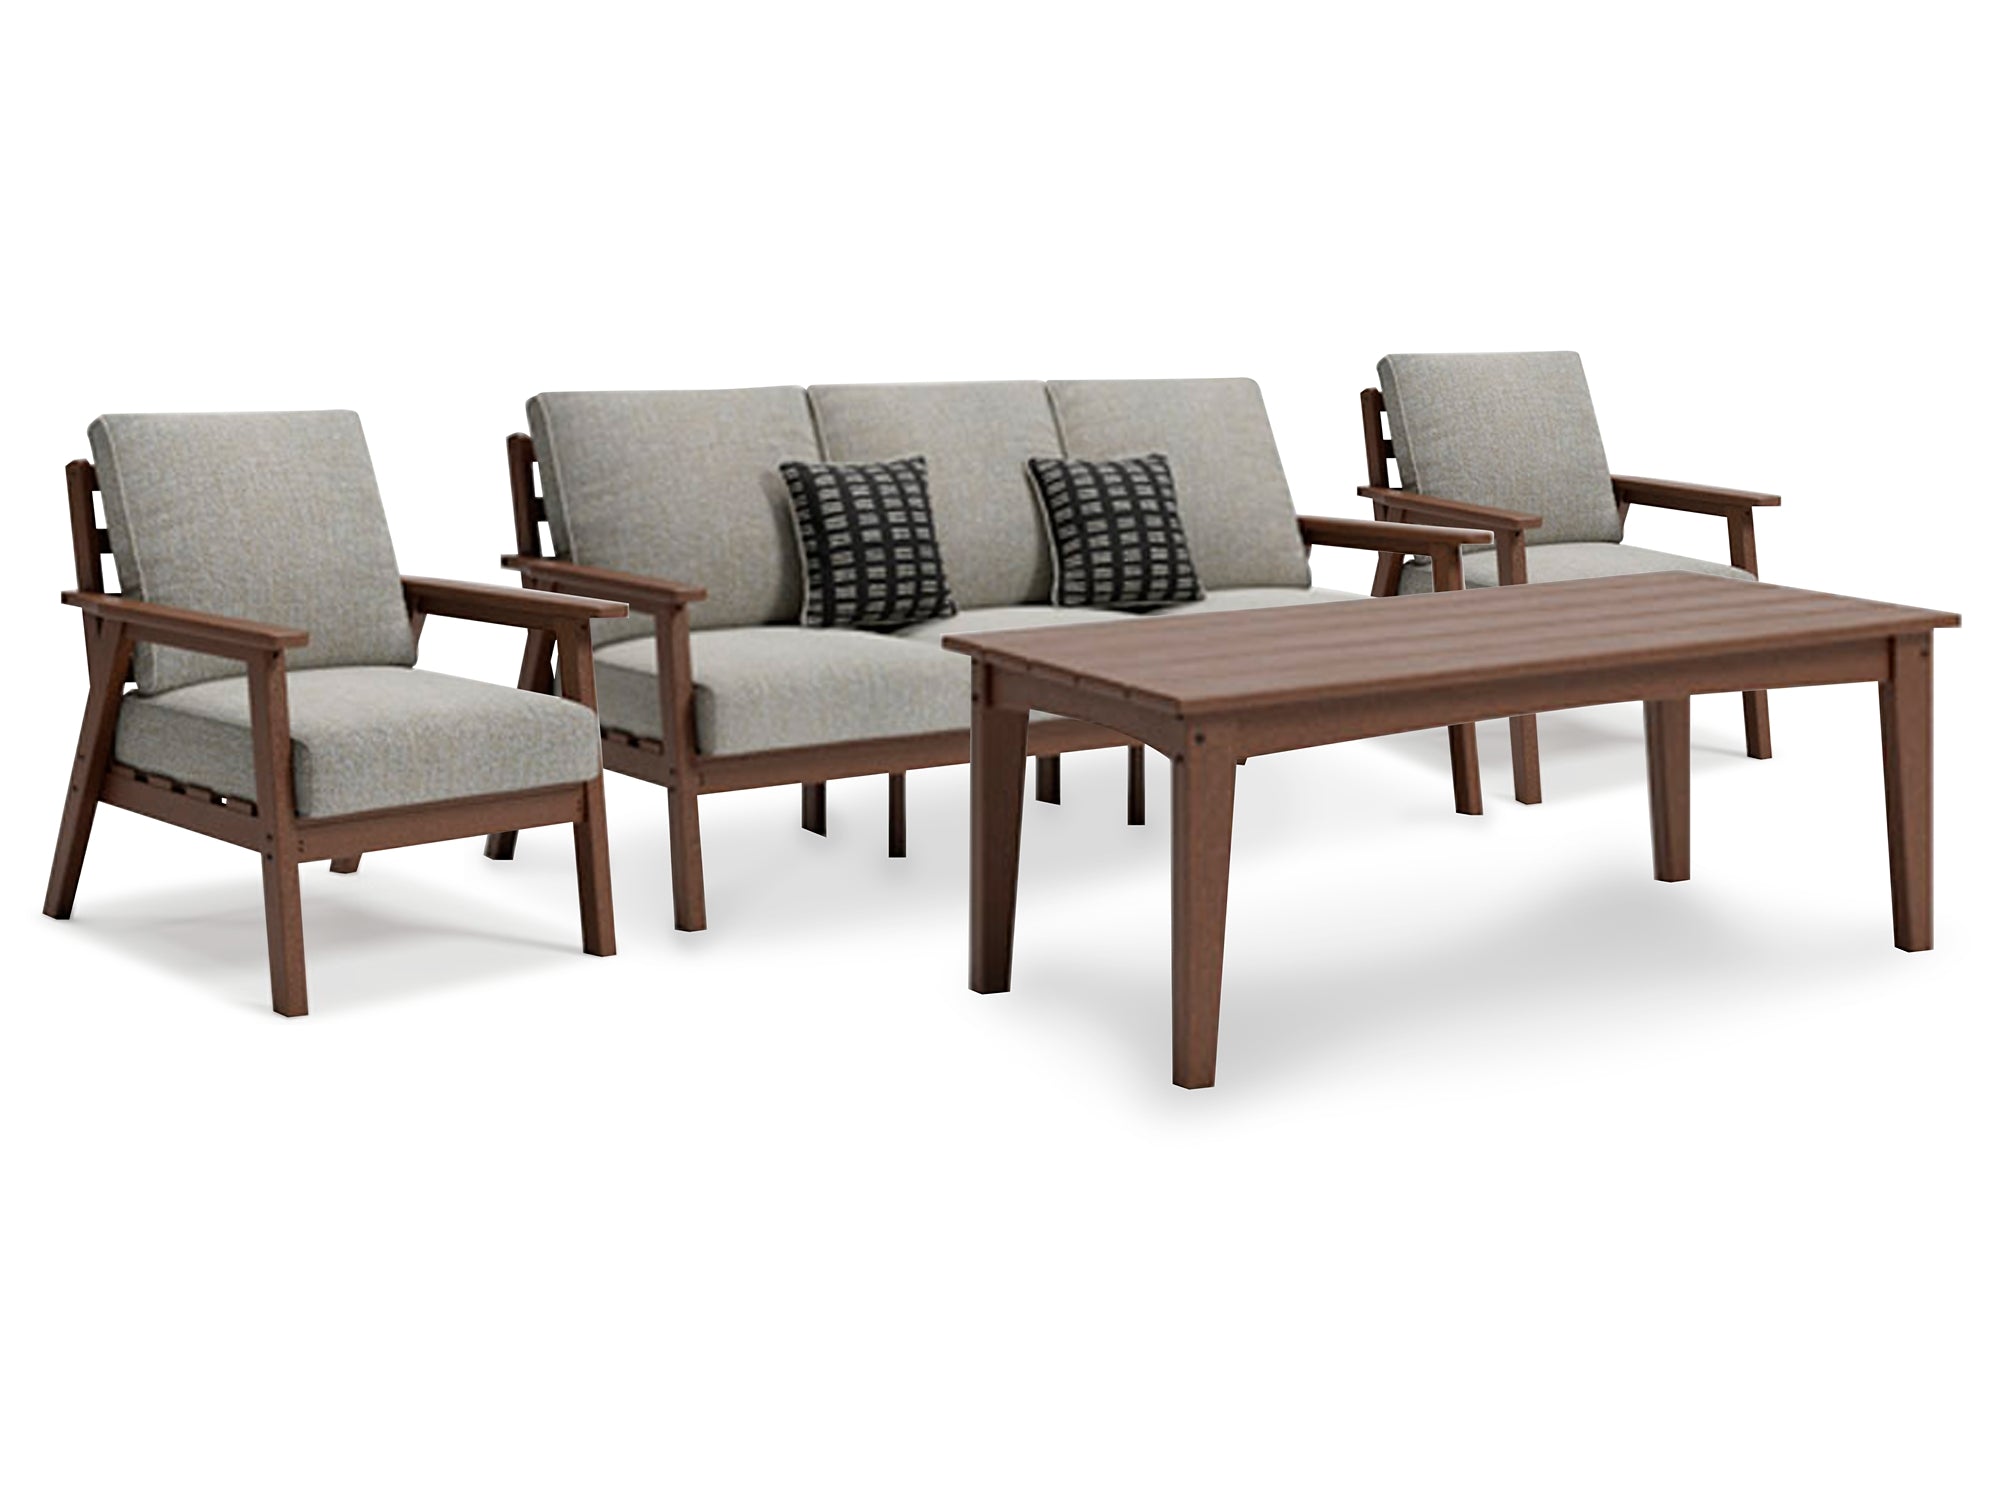 Emmeline Outdoor Sofa and 2 Chairs with Coffee Table